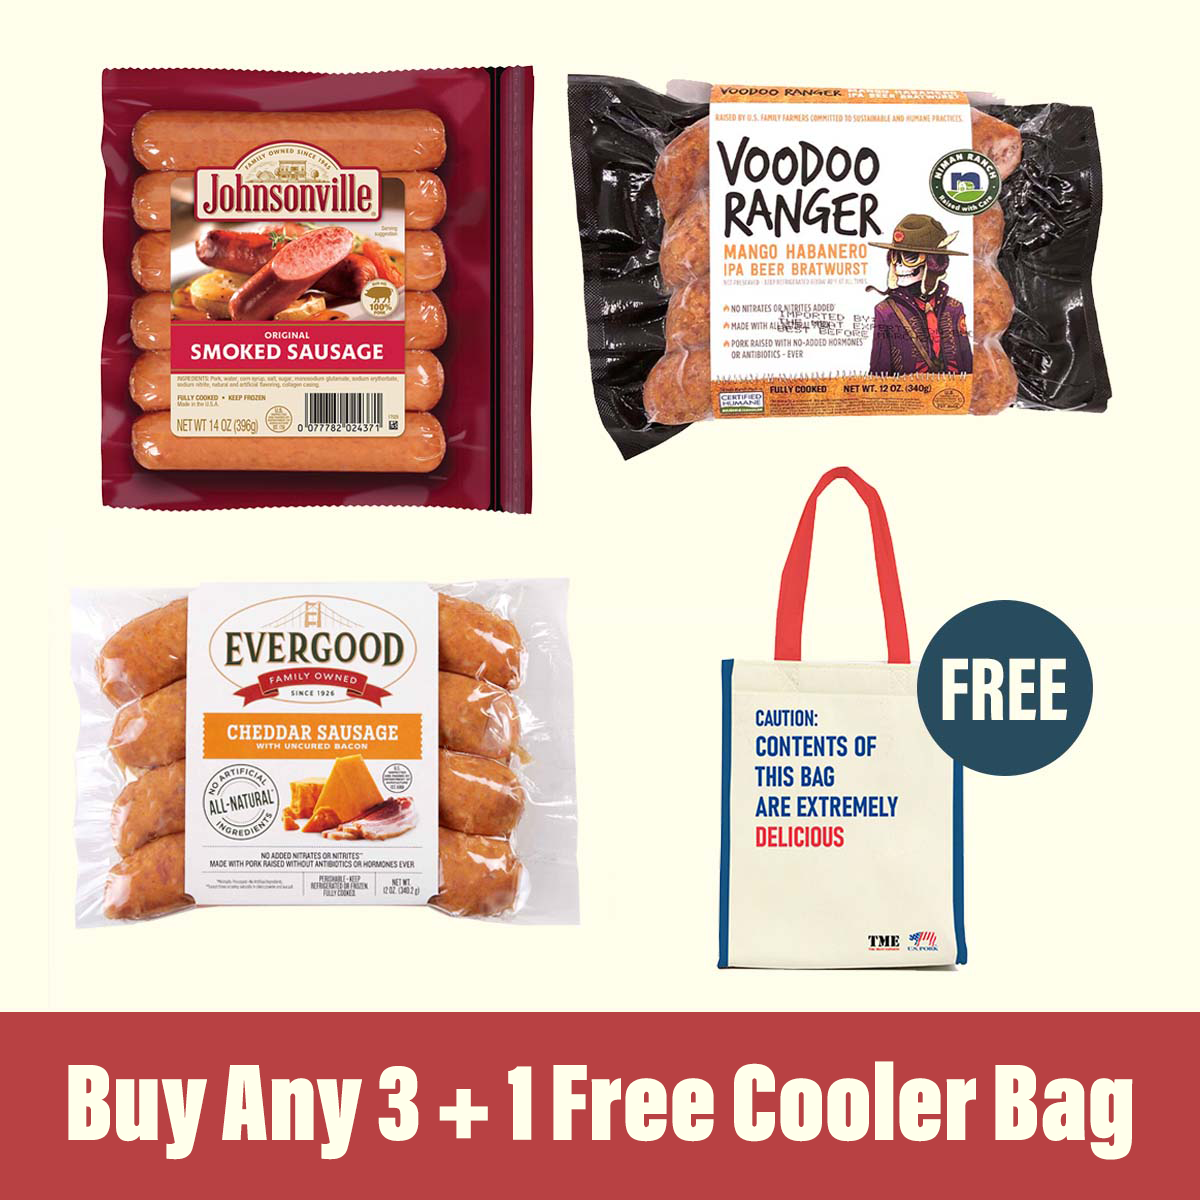 Buy Any 3 US Frozen Pork Products & Get A Free Limited Cooler Bag